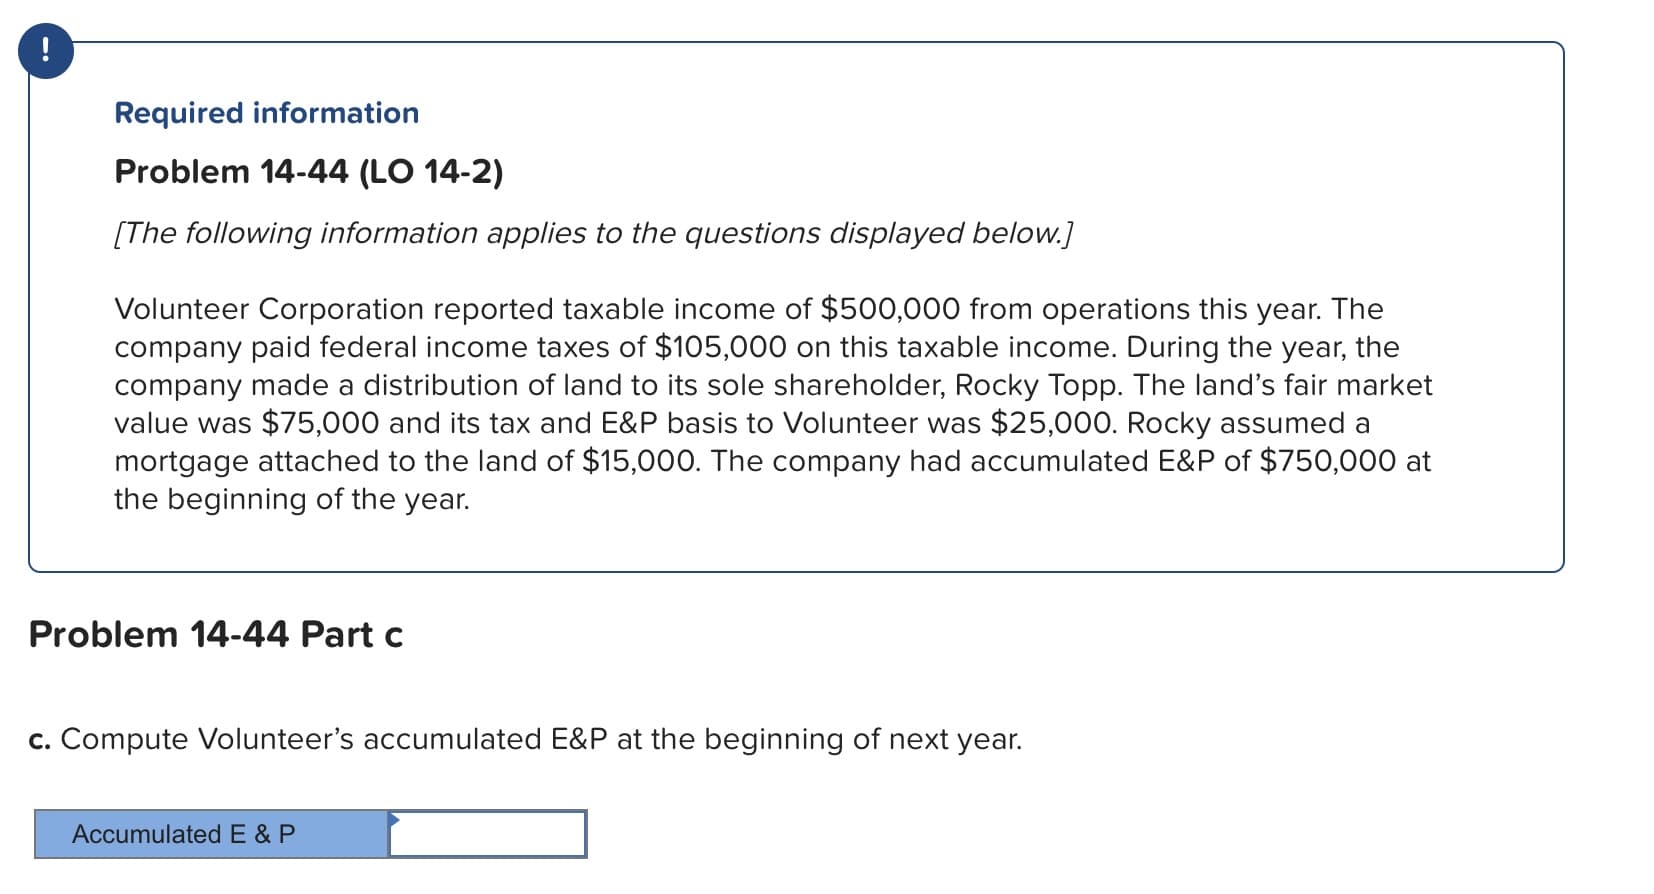 Required information
Problem 14-44 (LO 14-2)
The following information applies to the questions displayed below.
Volunteer Corporation reported taxable income of $500,000 from operations this year. The
company paid federal income taxes of $105,000 on this taxable income. During the year, the
company made a distribution of land to its sole shareholder, Rocky Topp. The land's fair market
value was $75,000 and its tax and E&P basis to Volunteer was $25,000. Rocky assumed a
mortgage attached to the land of $15,000. The company had accumulated E&P of $750,000 at
the beginning of the year.
Problem 14-44 Part c
c. Compute Volunteer's accumulated E&P at the beginning of next year.
Accumulated E & P
